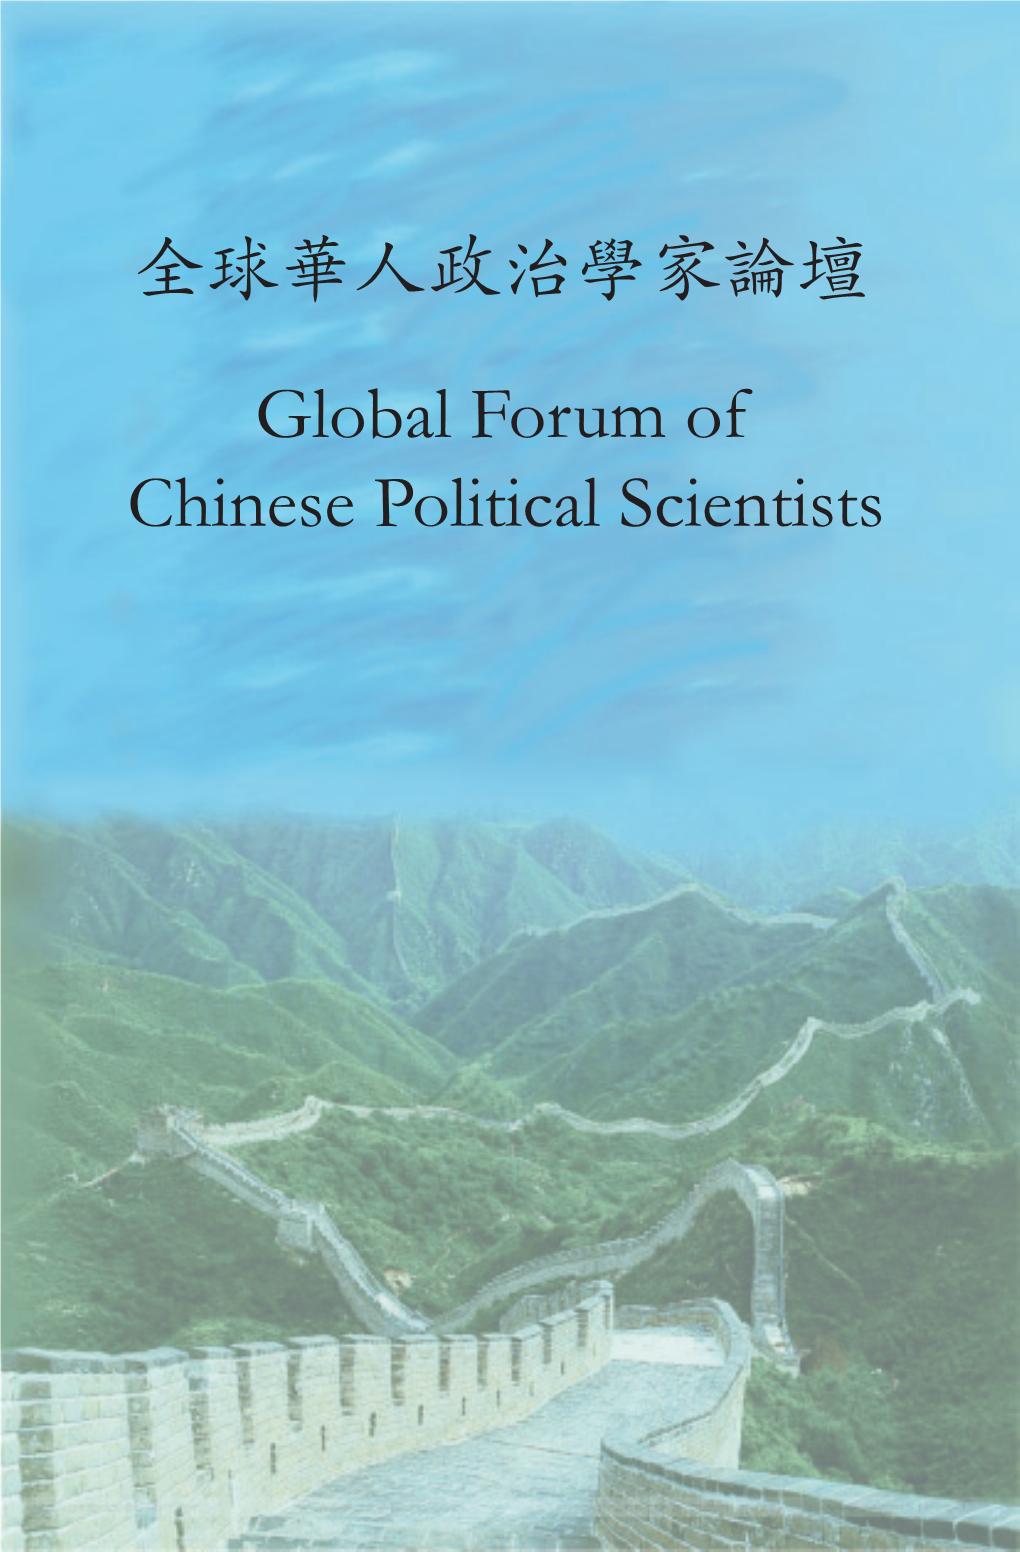 Global Forum of Chinese Political Scientists 全球華人政治學家論壇 Global Forum of Chinese Political Scientists